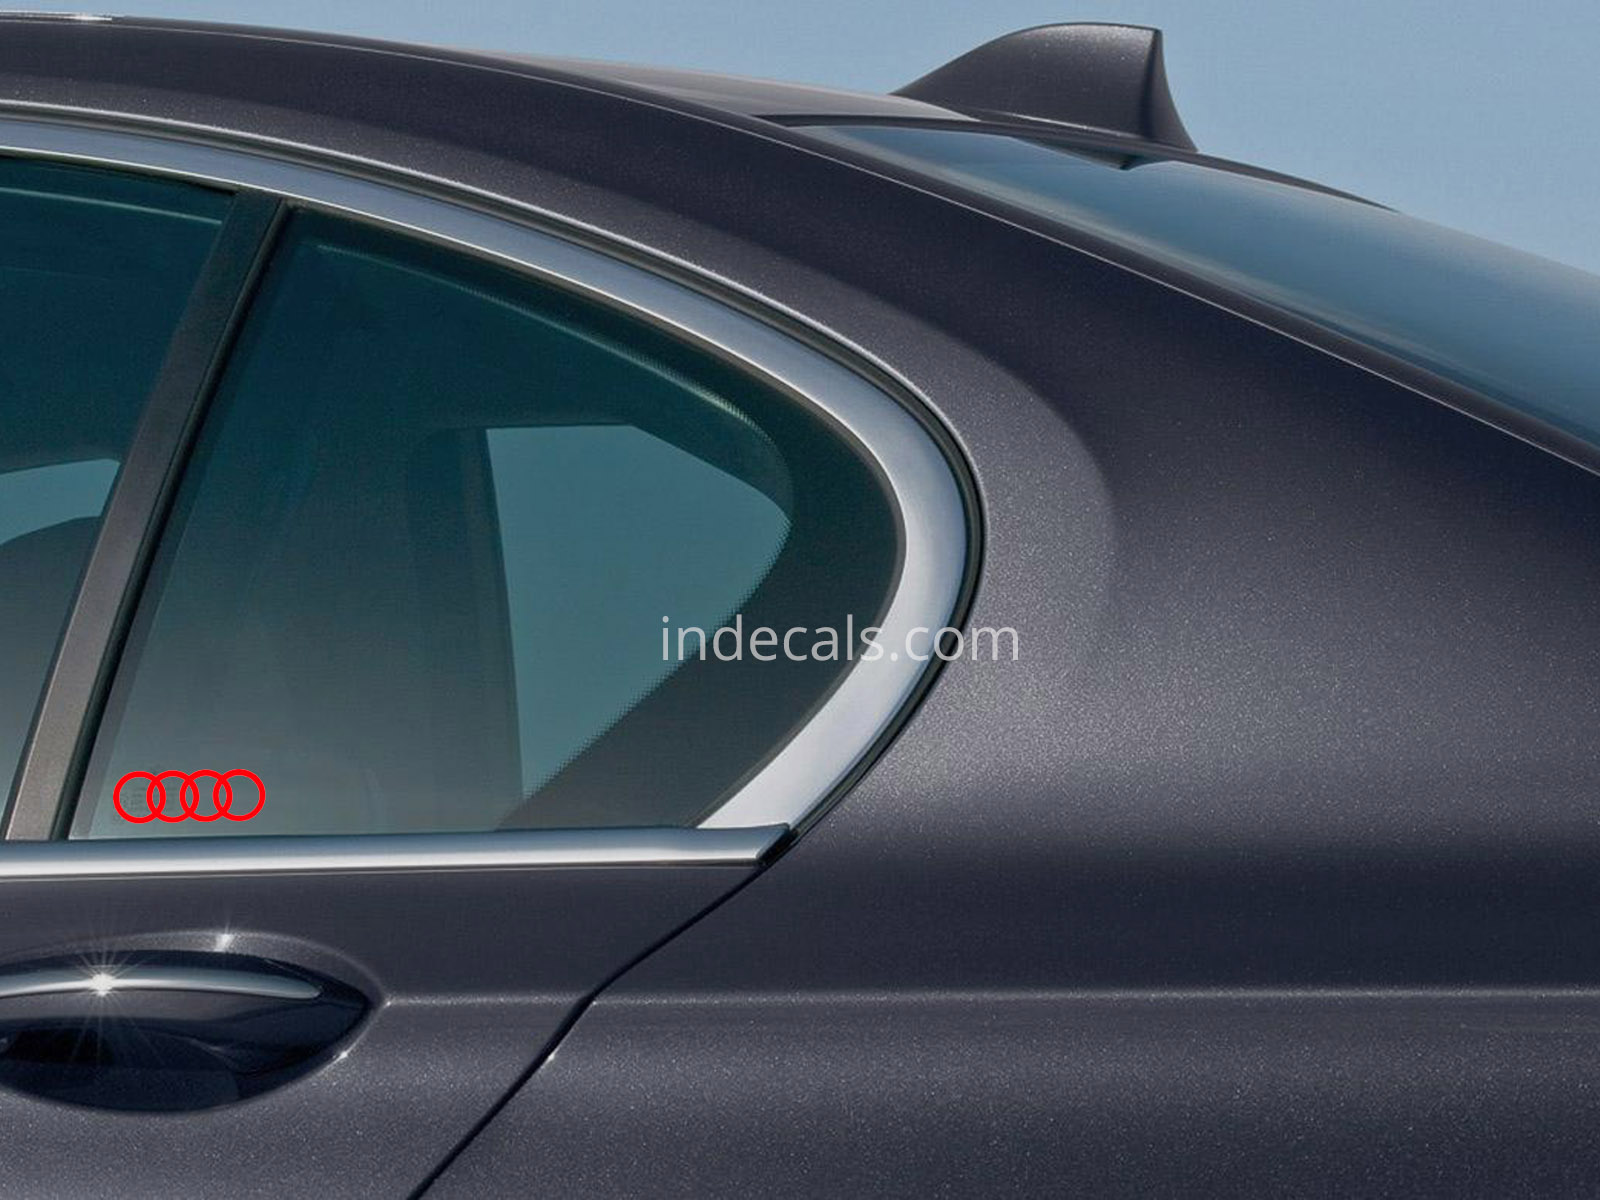 3 x Audi Rings Stickers for Rear Window - Red